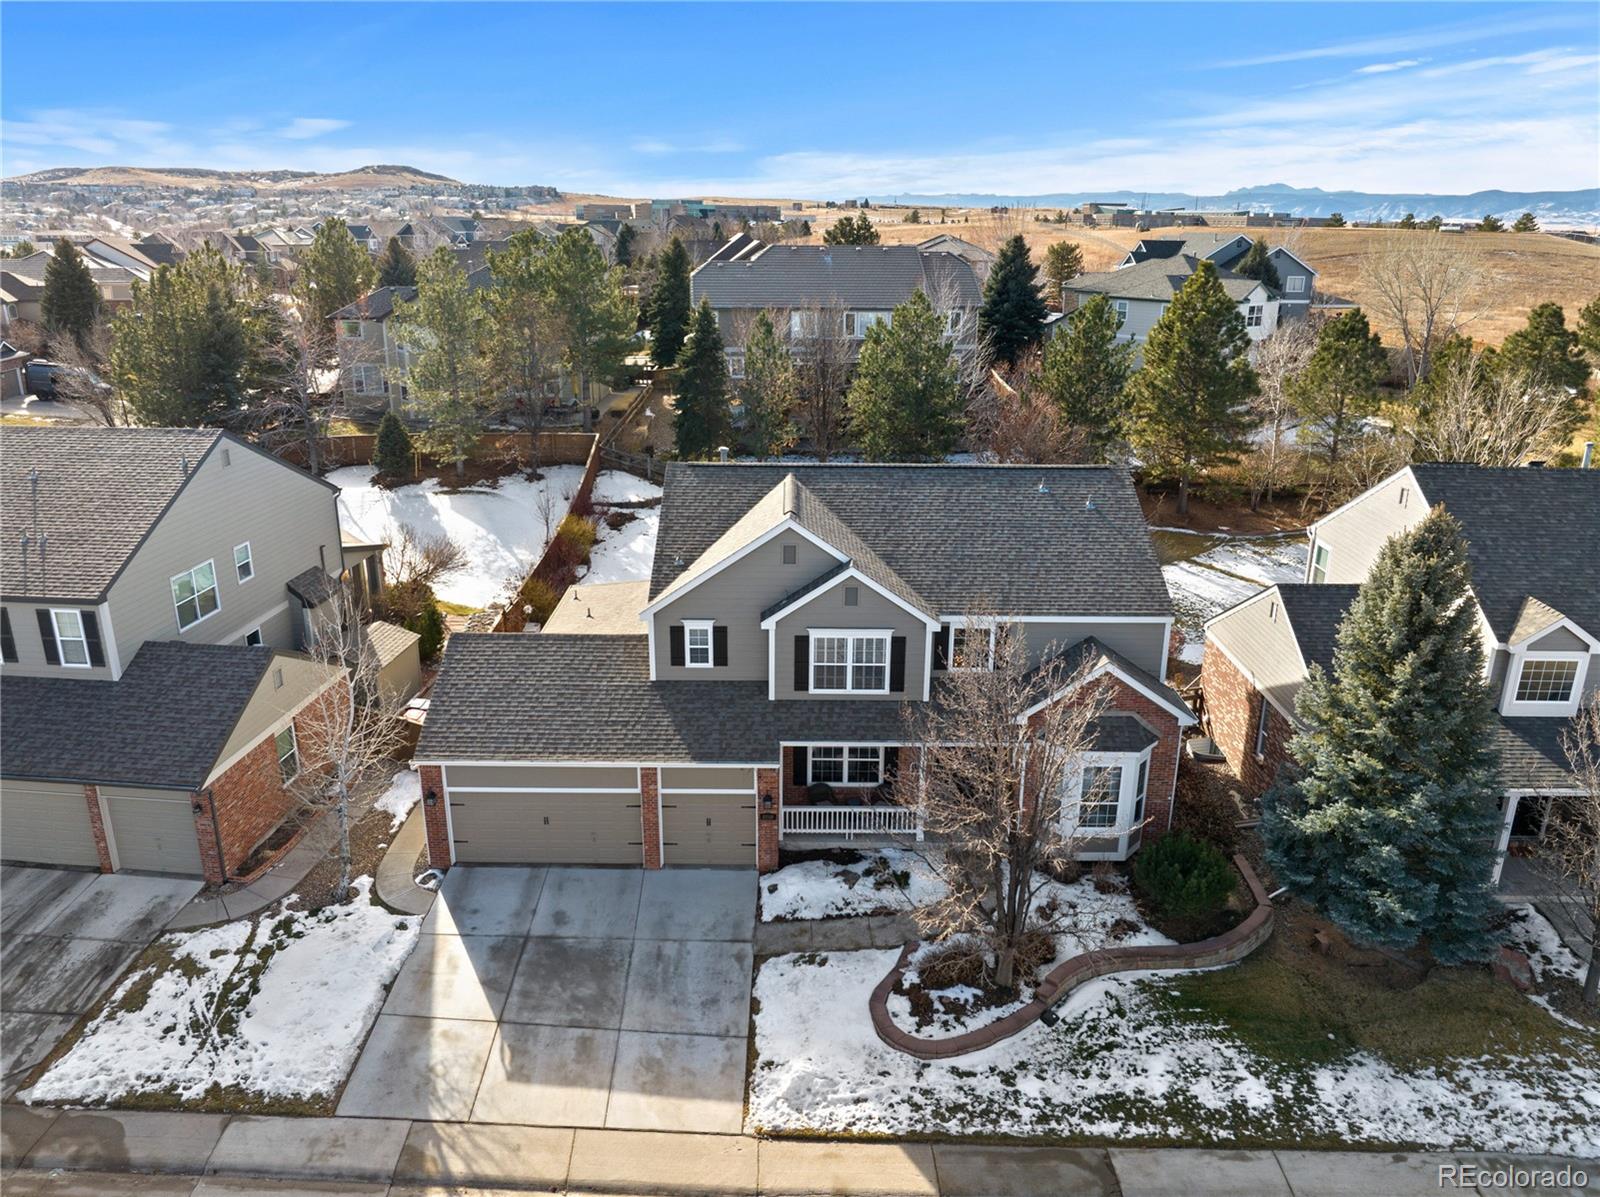 2250  briargrove drive, Highlands Ranch sold home. Closed on 2024-04-17 for $1,200,000.